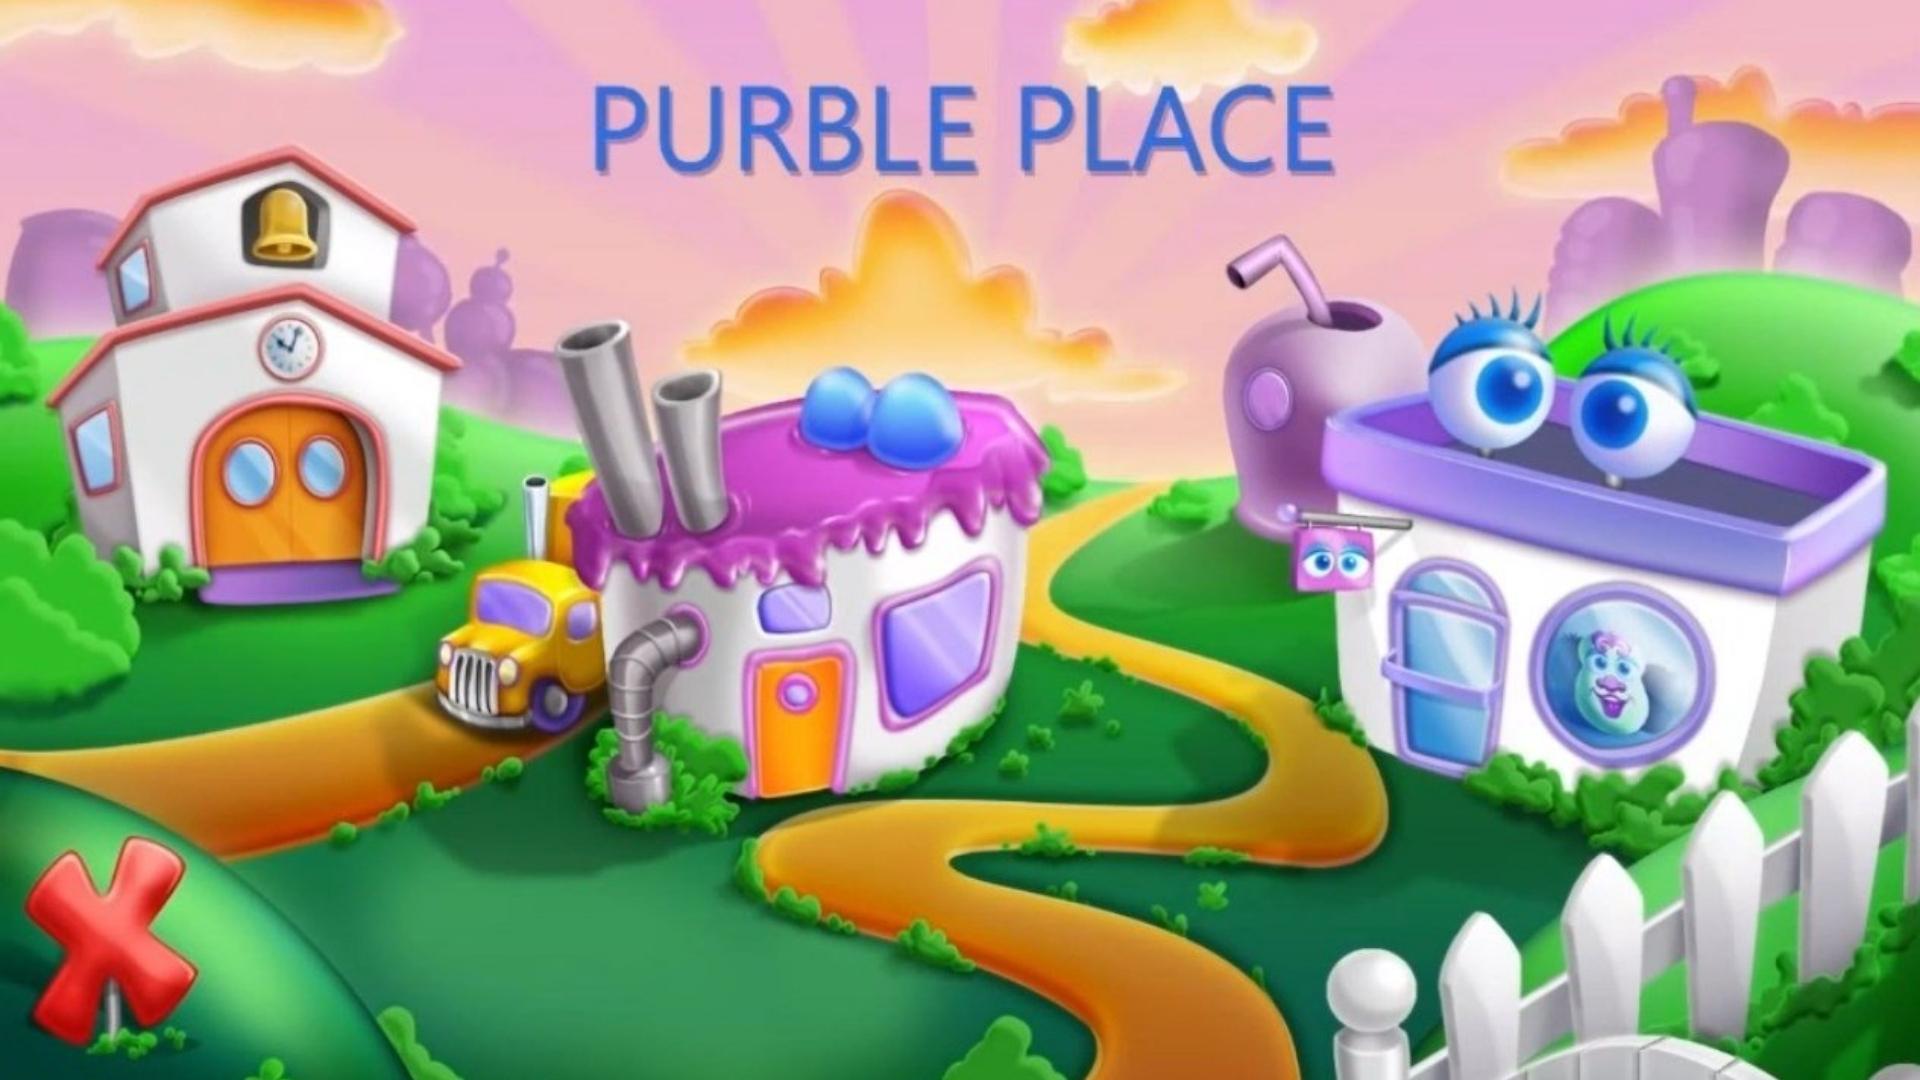 purble place game download free windows 7